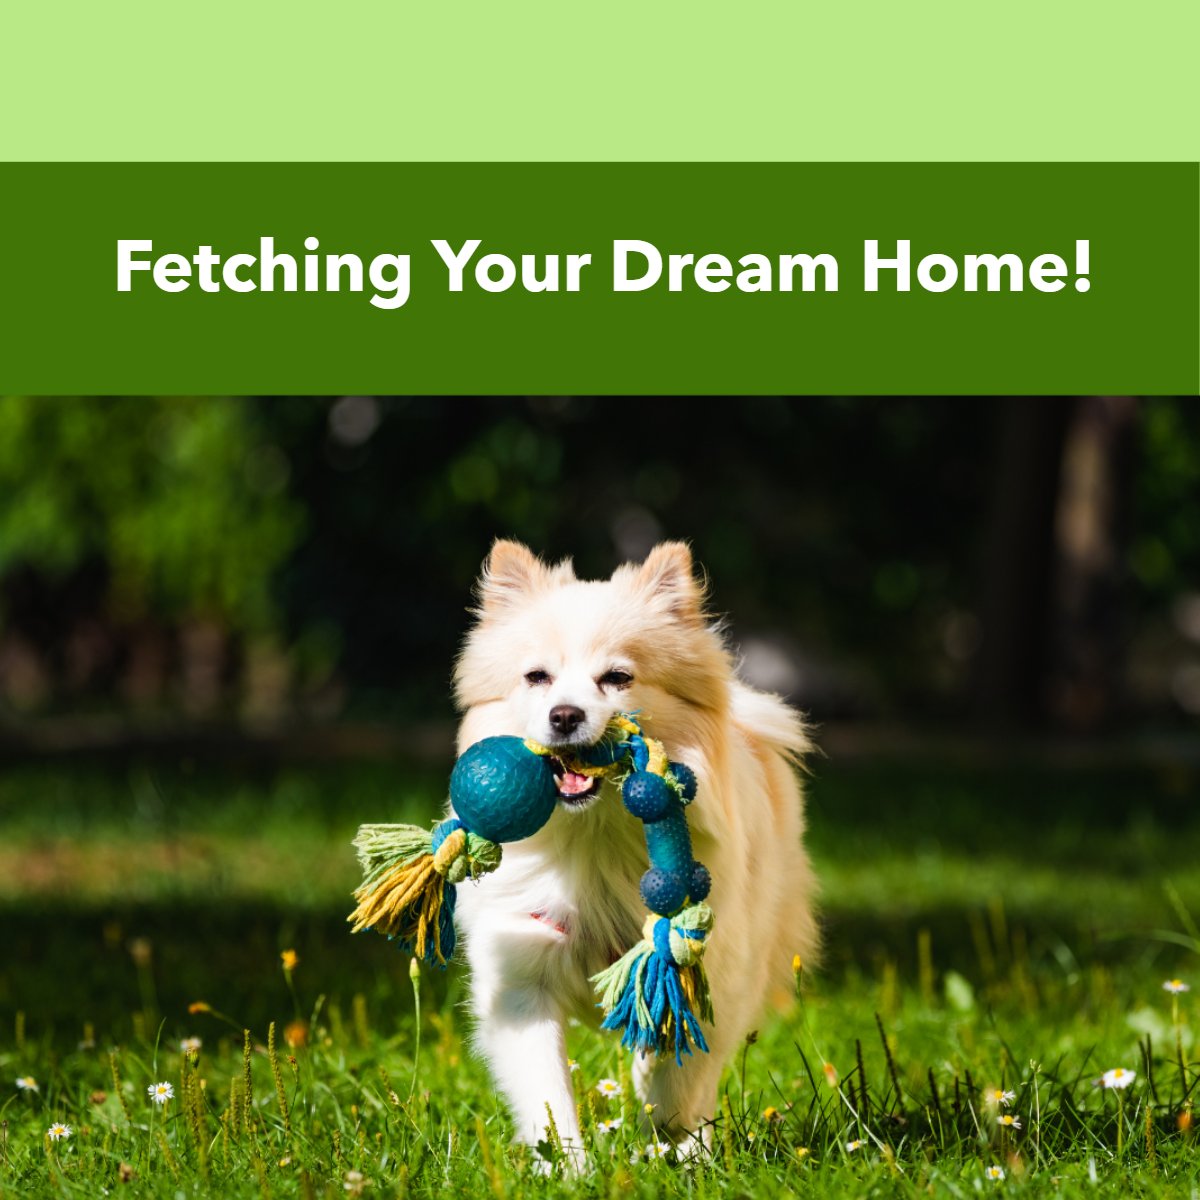 I can help ... 

Fetching your dream home!! 🏡

Feel free to contact me.. 😉
#HomeForSale #SimiValleyHOmes #ThousandOaksHOmesforSale #MoorparkHomesForSale #VenturaCountyHomeForSale #CindyTothRealtor #EducateAndNEgotiate #CallMeFirst #HeretoHelp #RealEstateForSale